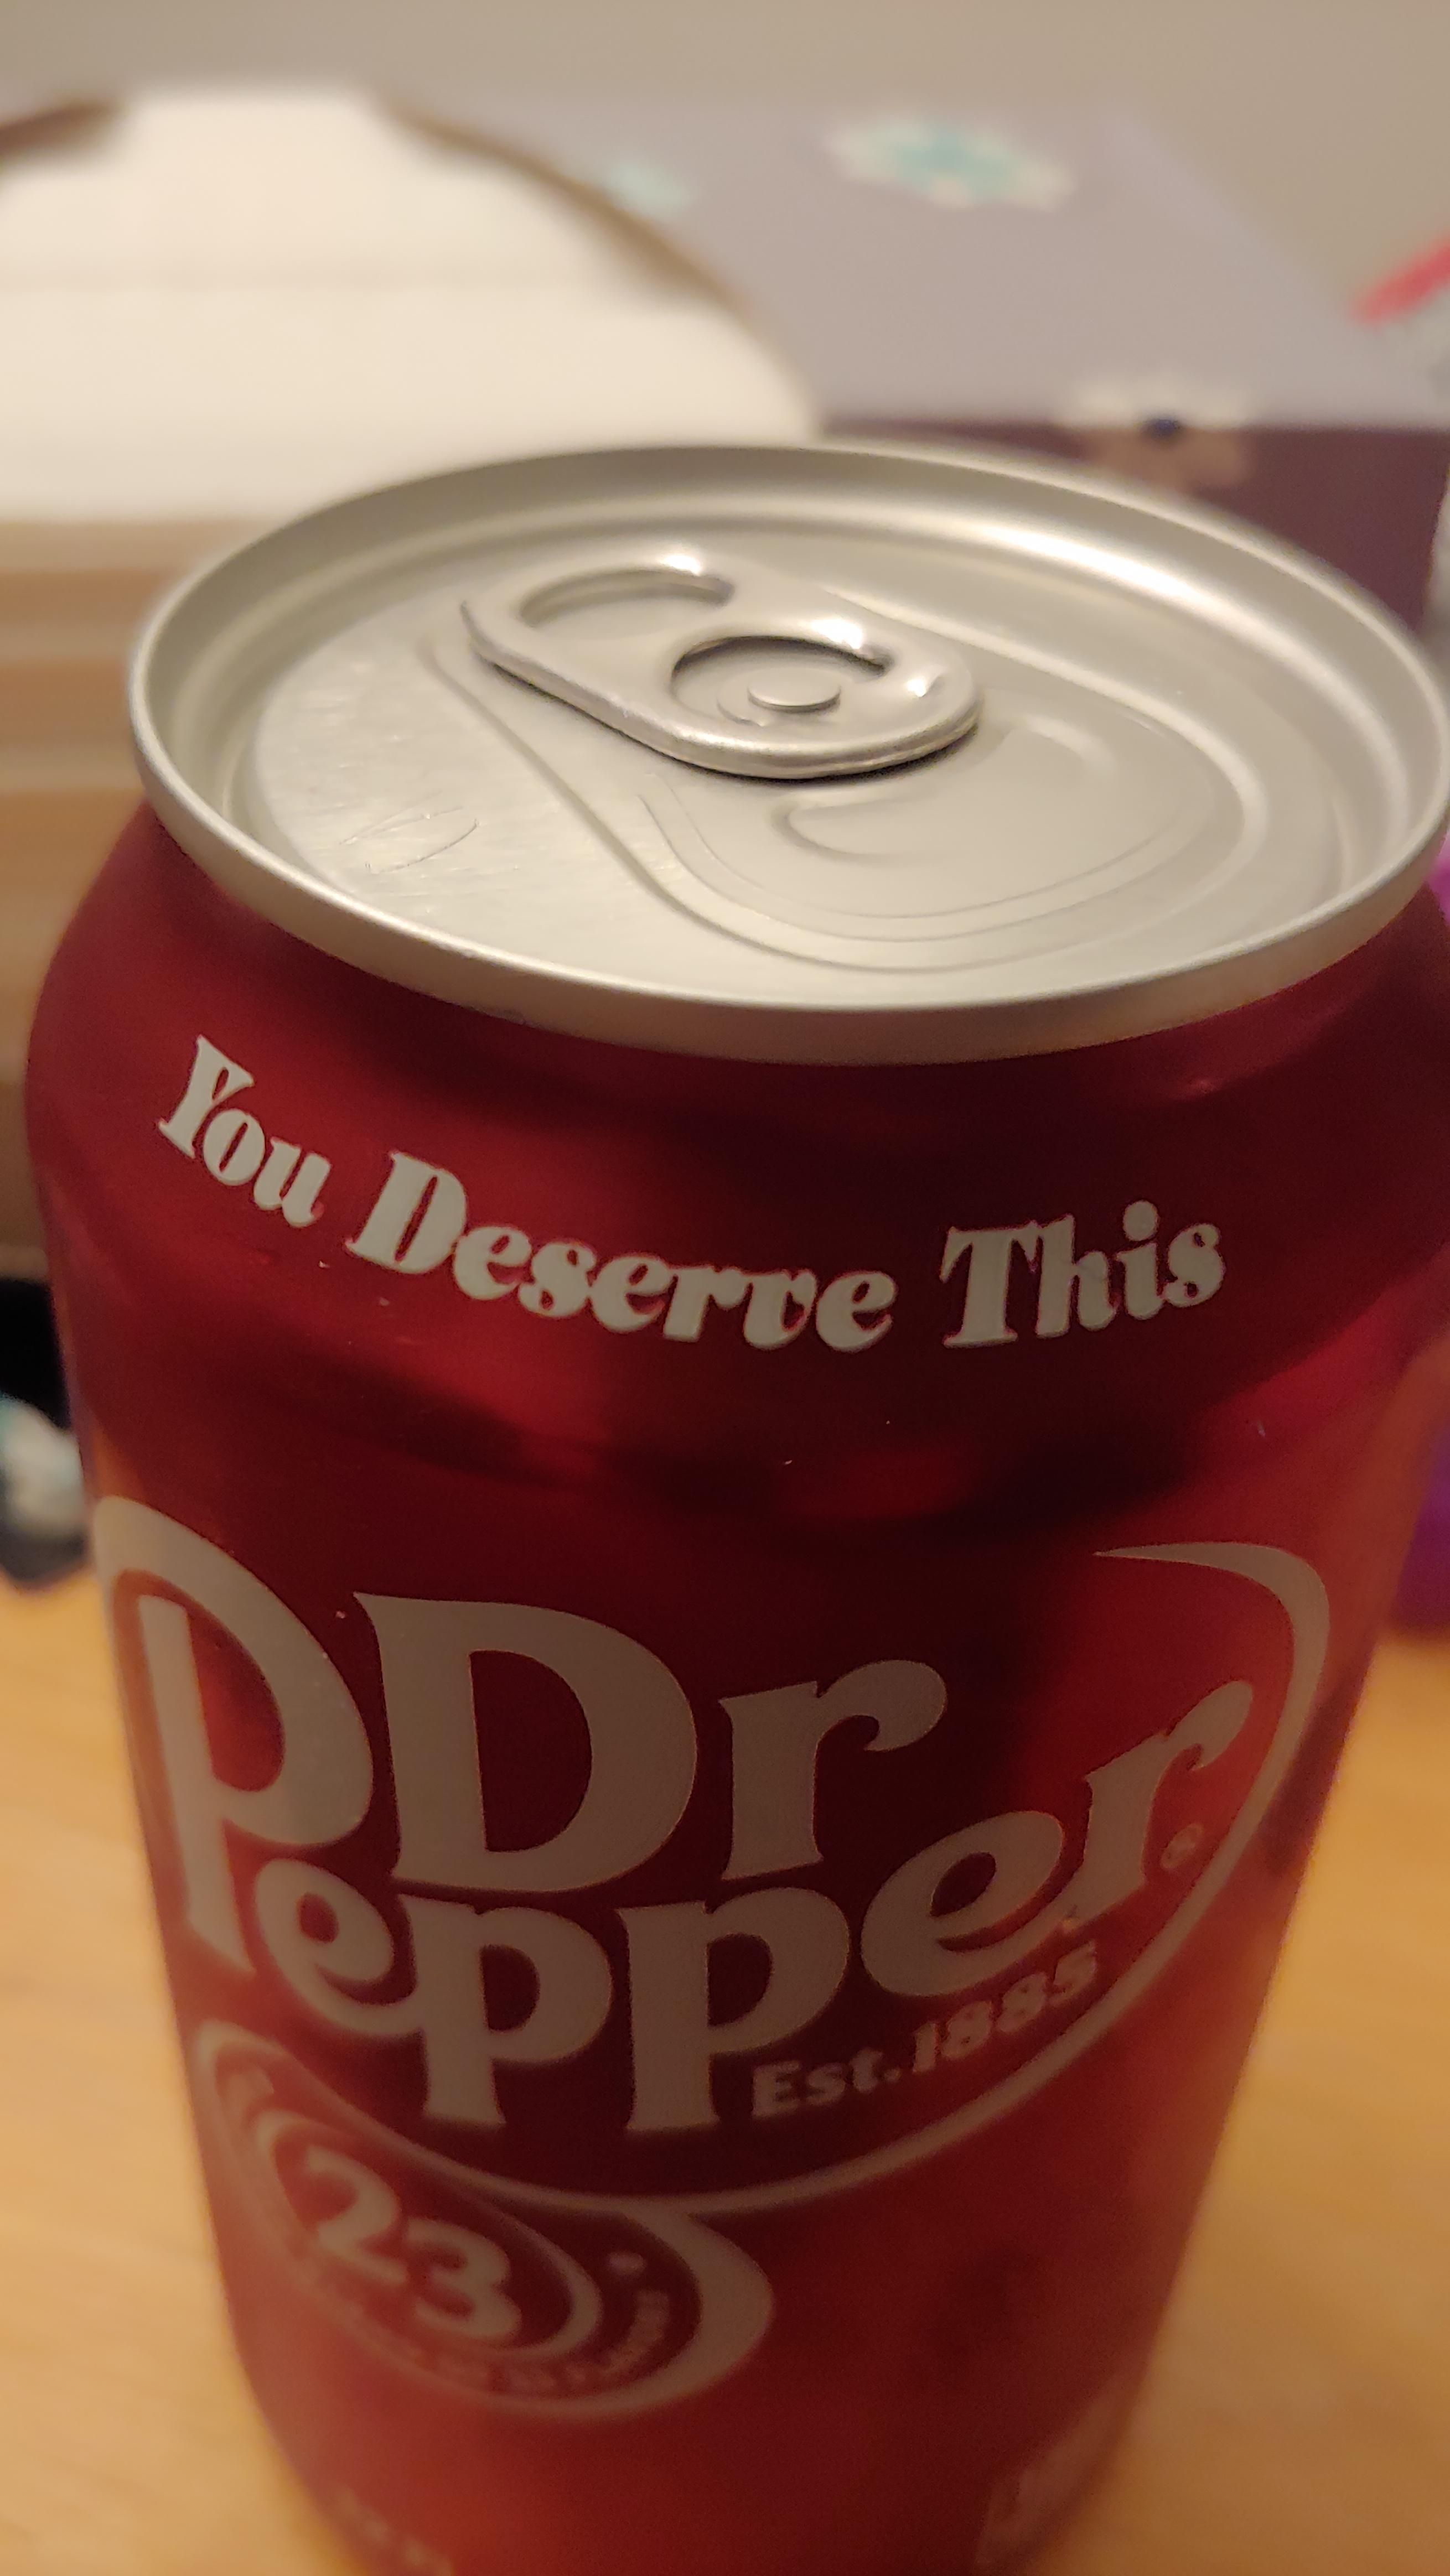 Well *** you too, Dr Pepper